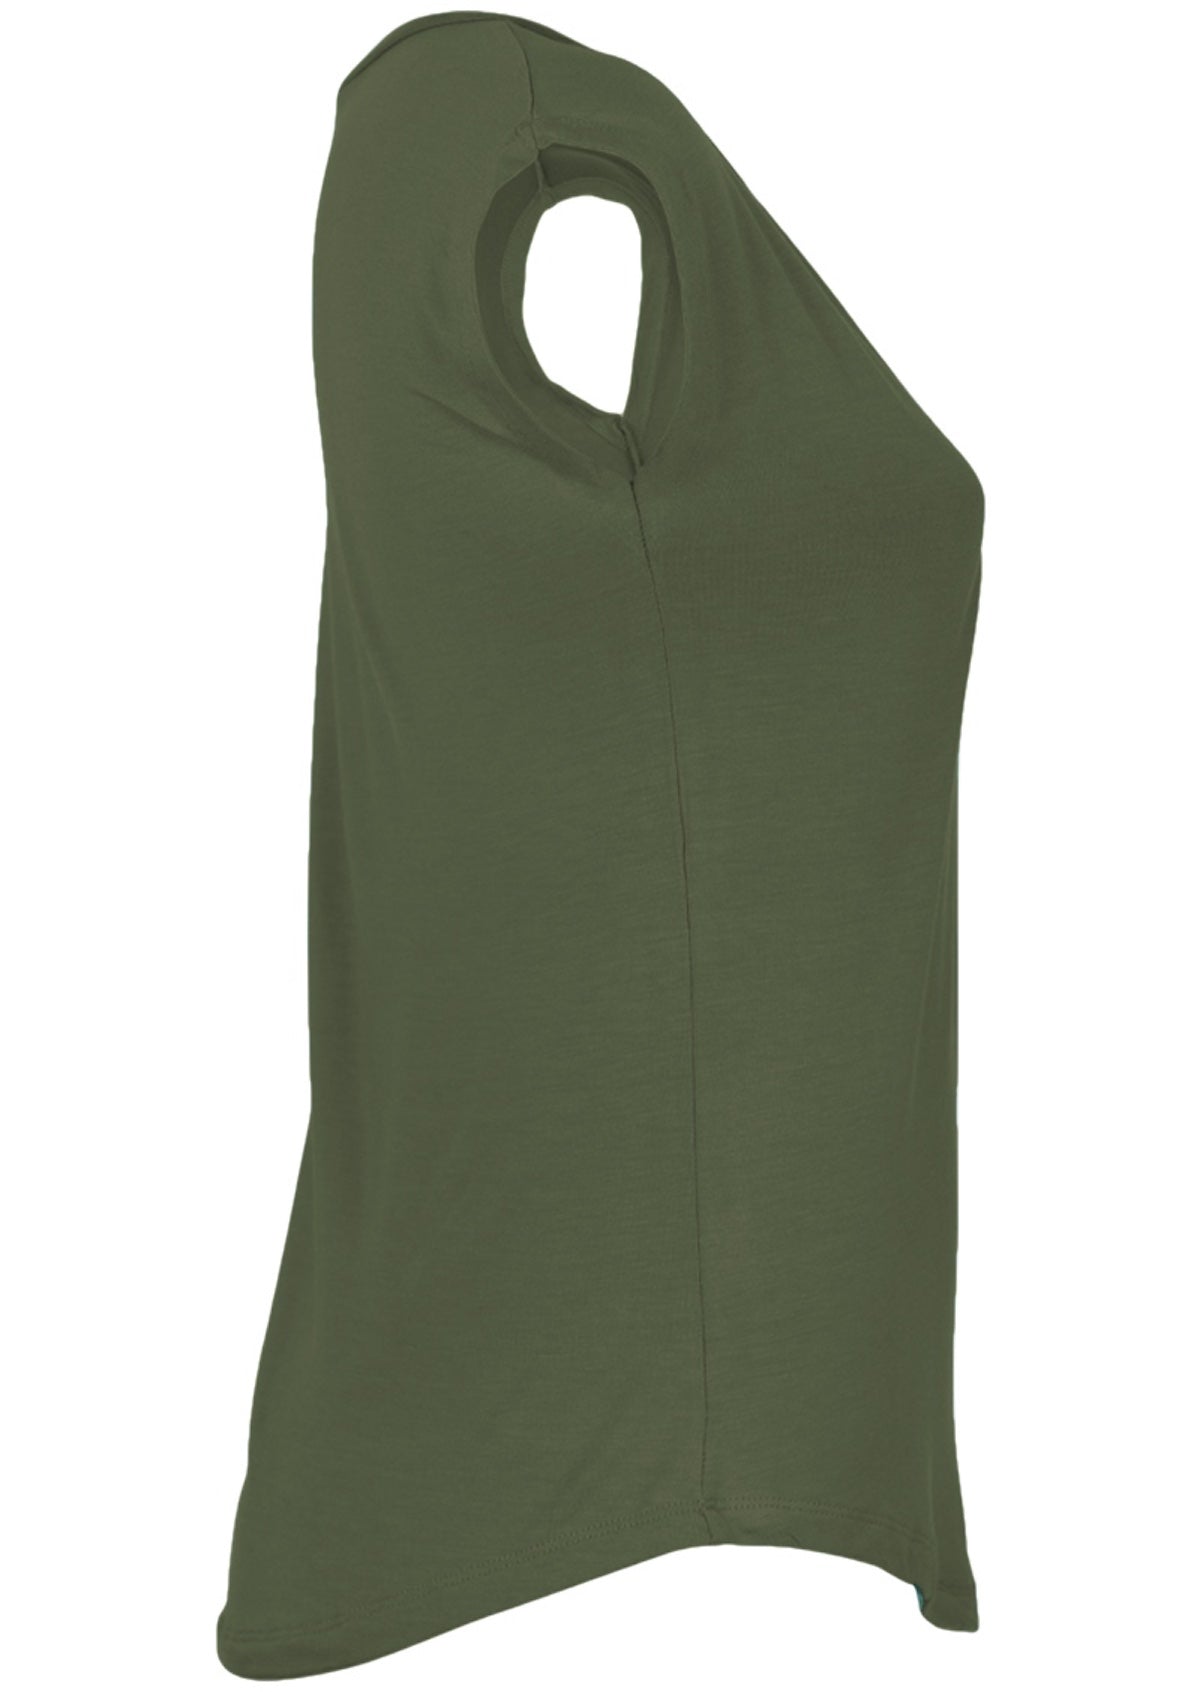 Side view of a women's olive green v-neck short cap sleeve rayon top